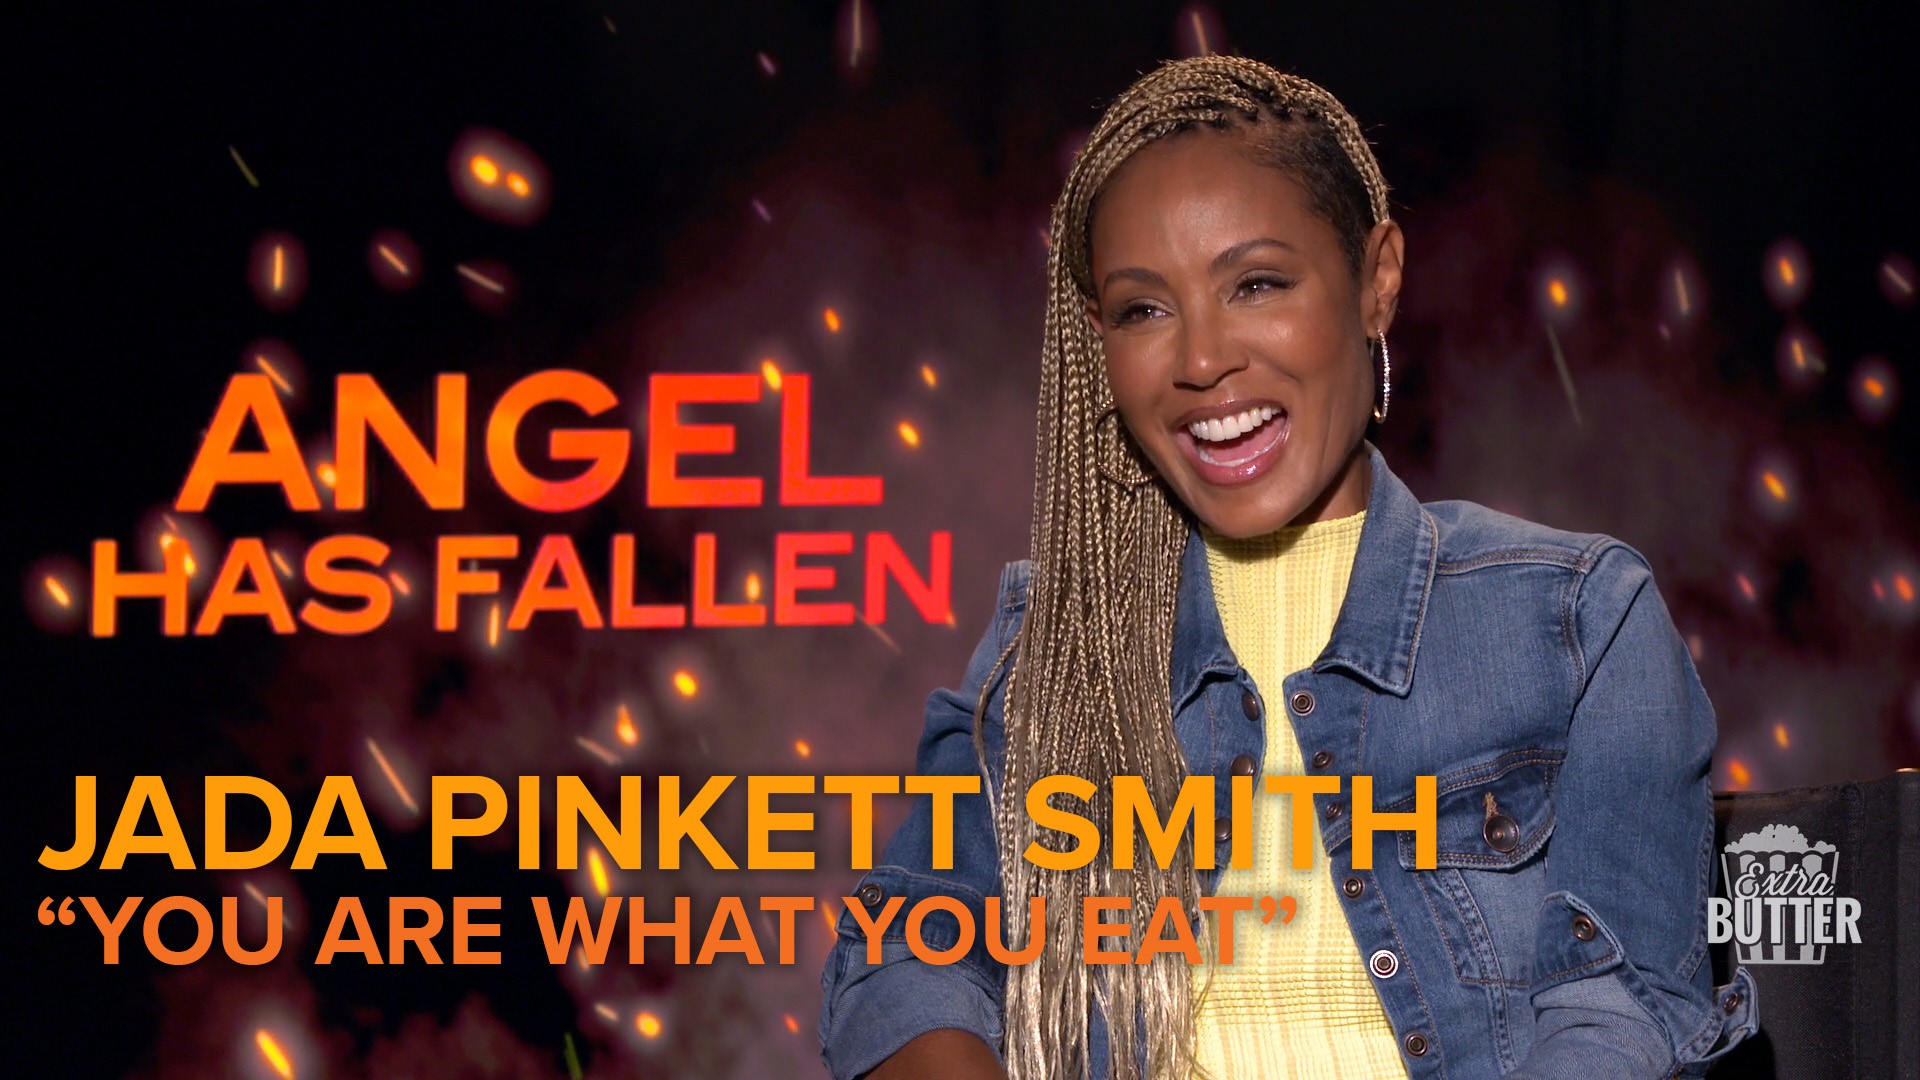 Jada Pinkett Smith shares some lifestyle advice while talking about her new movie 'Angel has Fallen.' Jada tells Mark S. Allen that her key to health and happiness is diet.